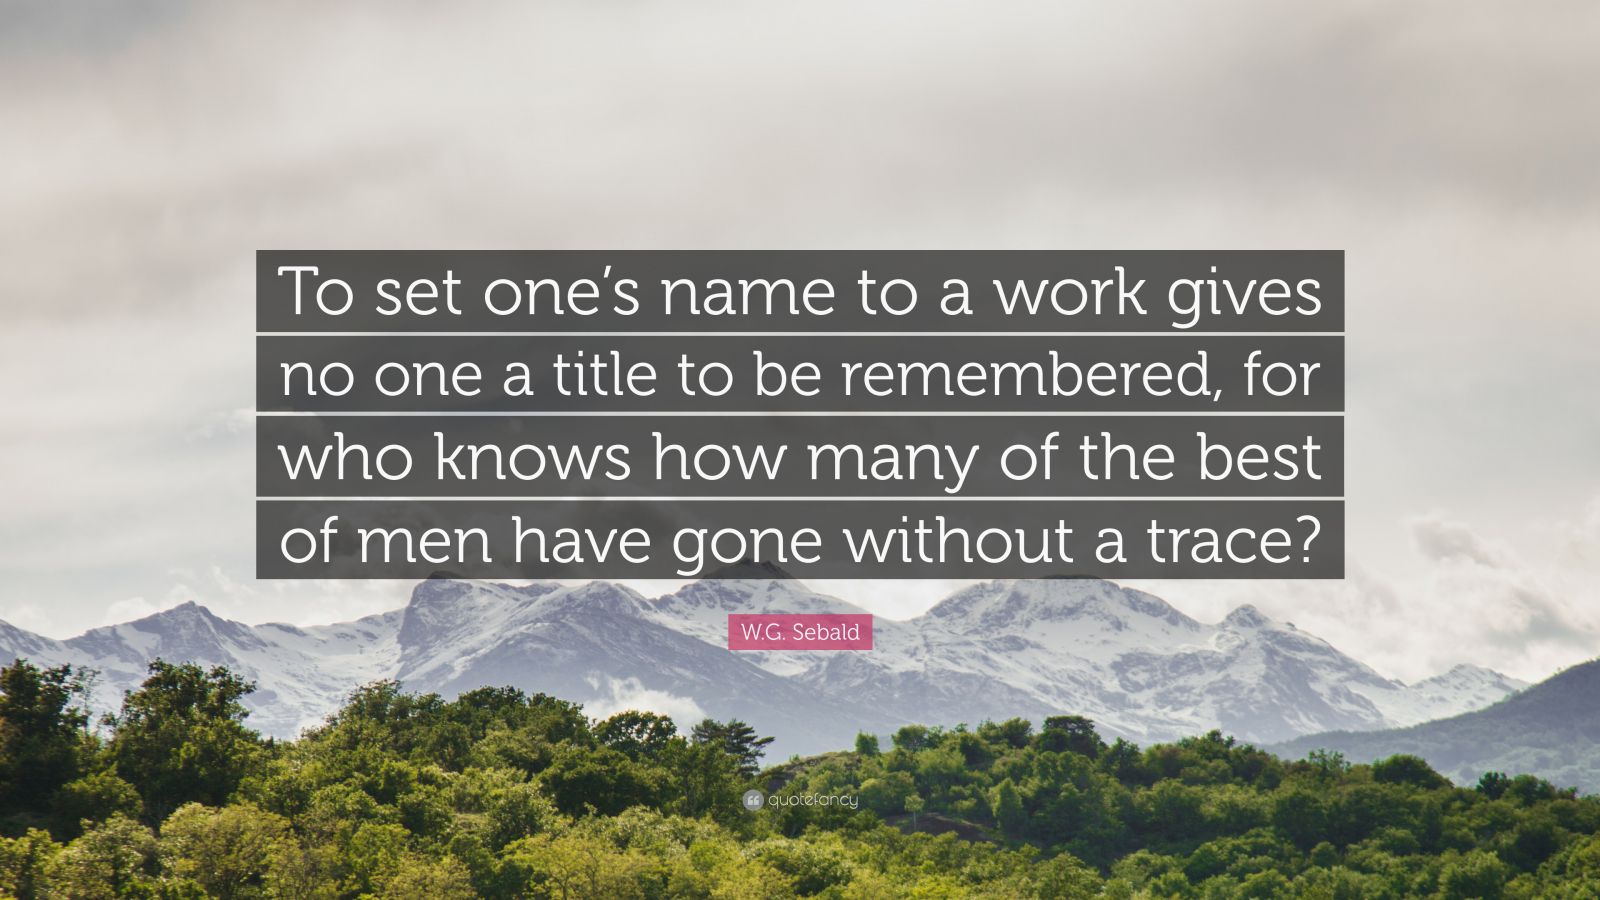 7249492 W G Sebald Quote To Set One S Name To A Work Gives No One A Title 